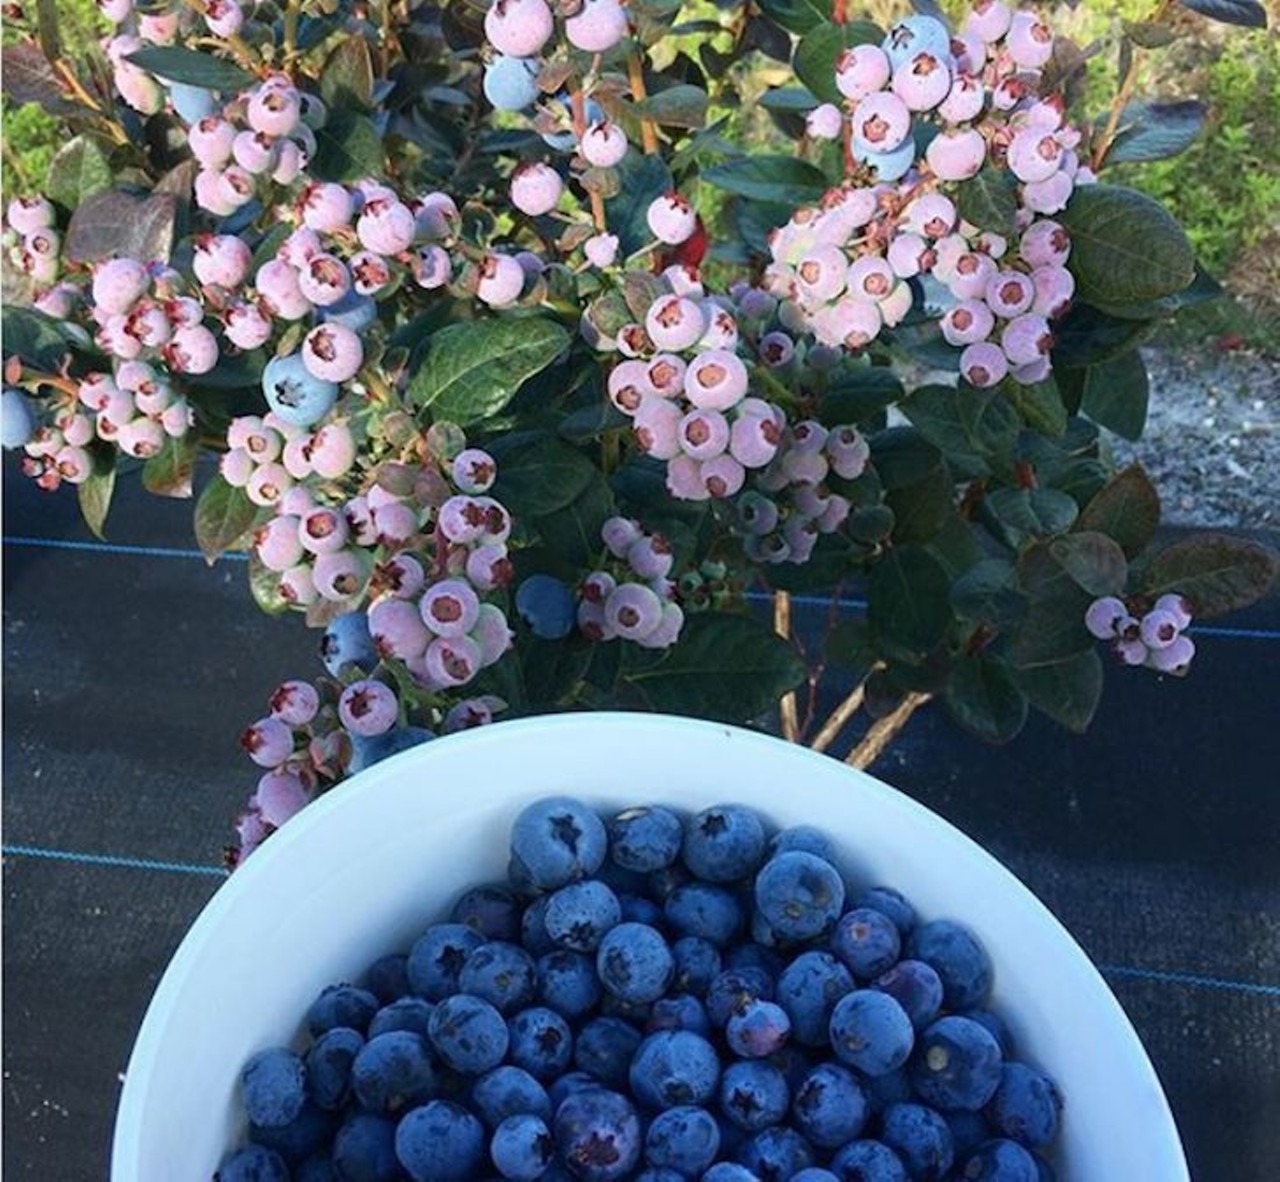 Chapman&#146;s Double C Bar Ranch
3650 N Canoe Creek Rd., Kenansville, 407-892-2414
Every Saturday, if the weather allows, Chapman&#146;s Ranch is open to friends and families to hand pick blueberries from 9 a.m. to 3 p.m. Blueberries are $5 per pound and if you get hungry they offer a mouth watering hamburger made from their own beef.
Distance from Orlando: 50 minutes
Photo via Chapman&#146;s Double C Bar Ranch/Instagram